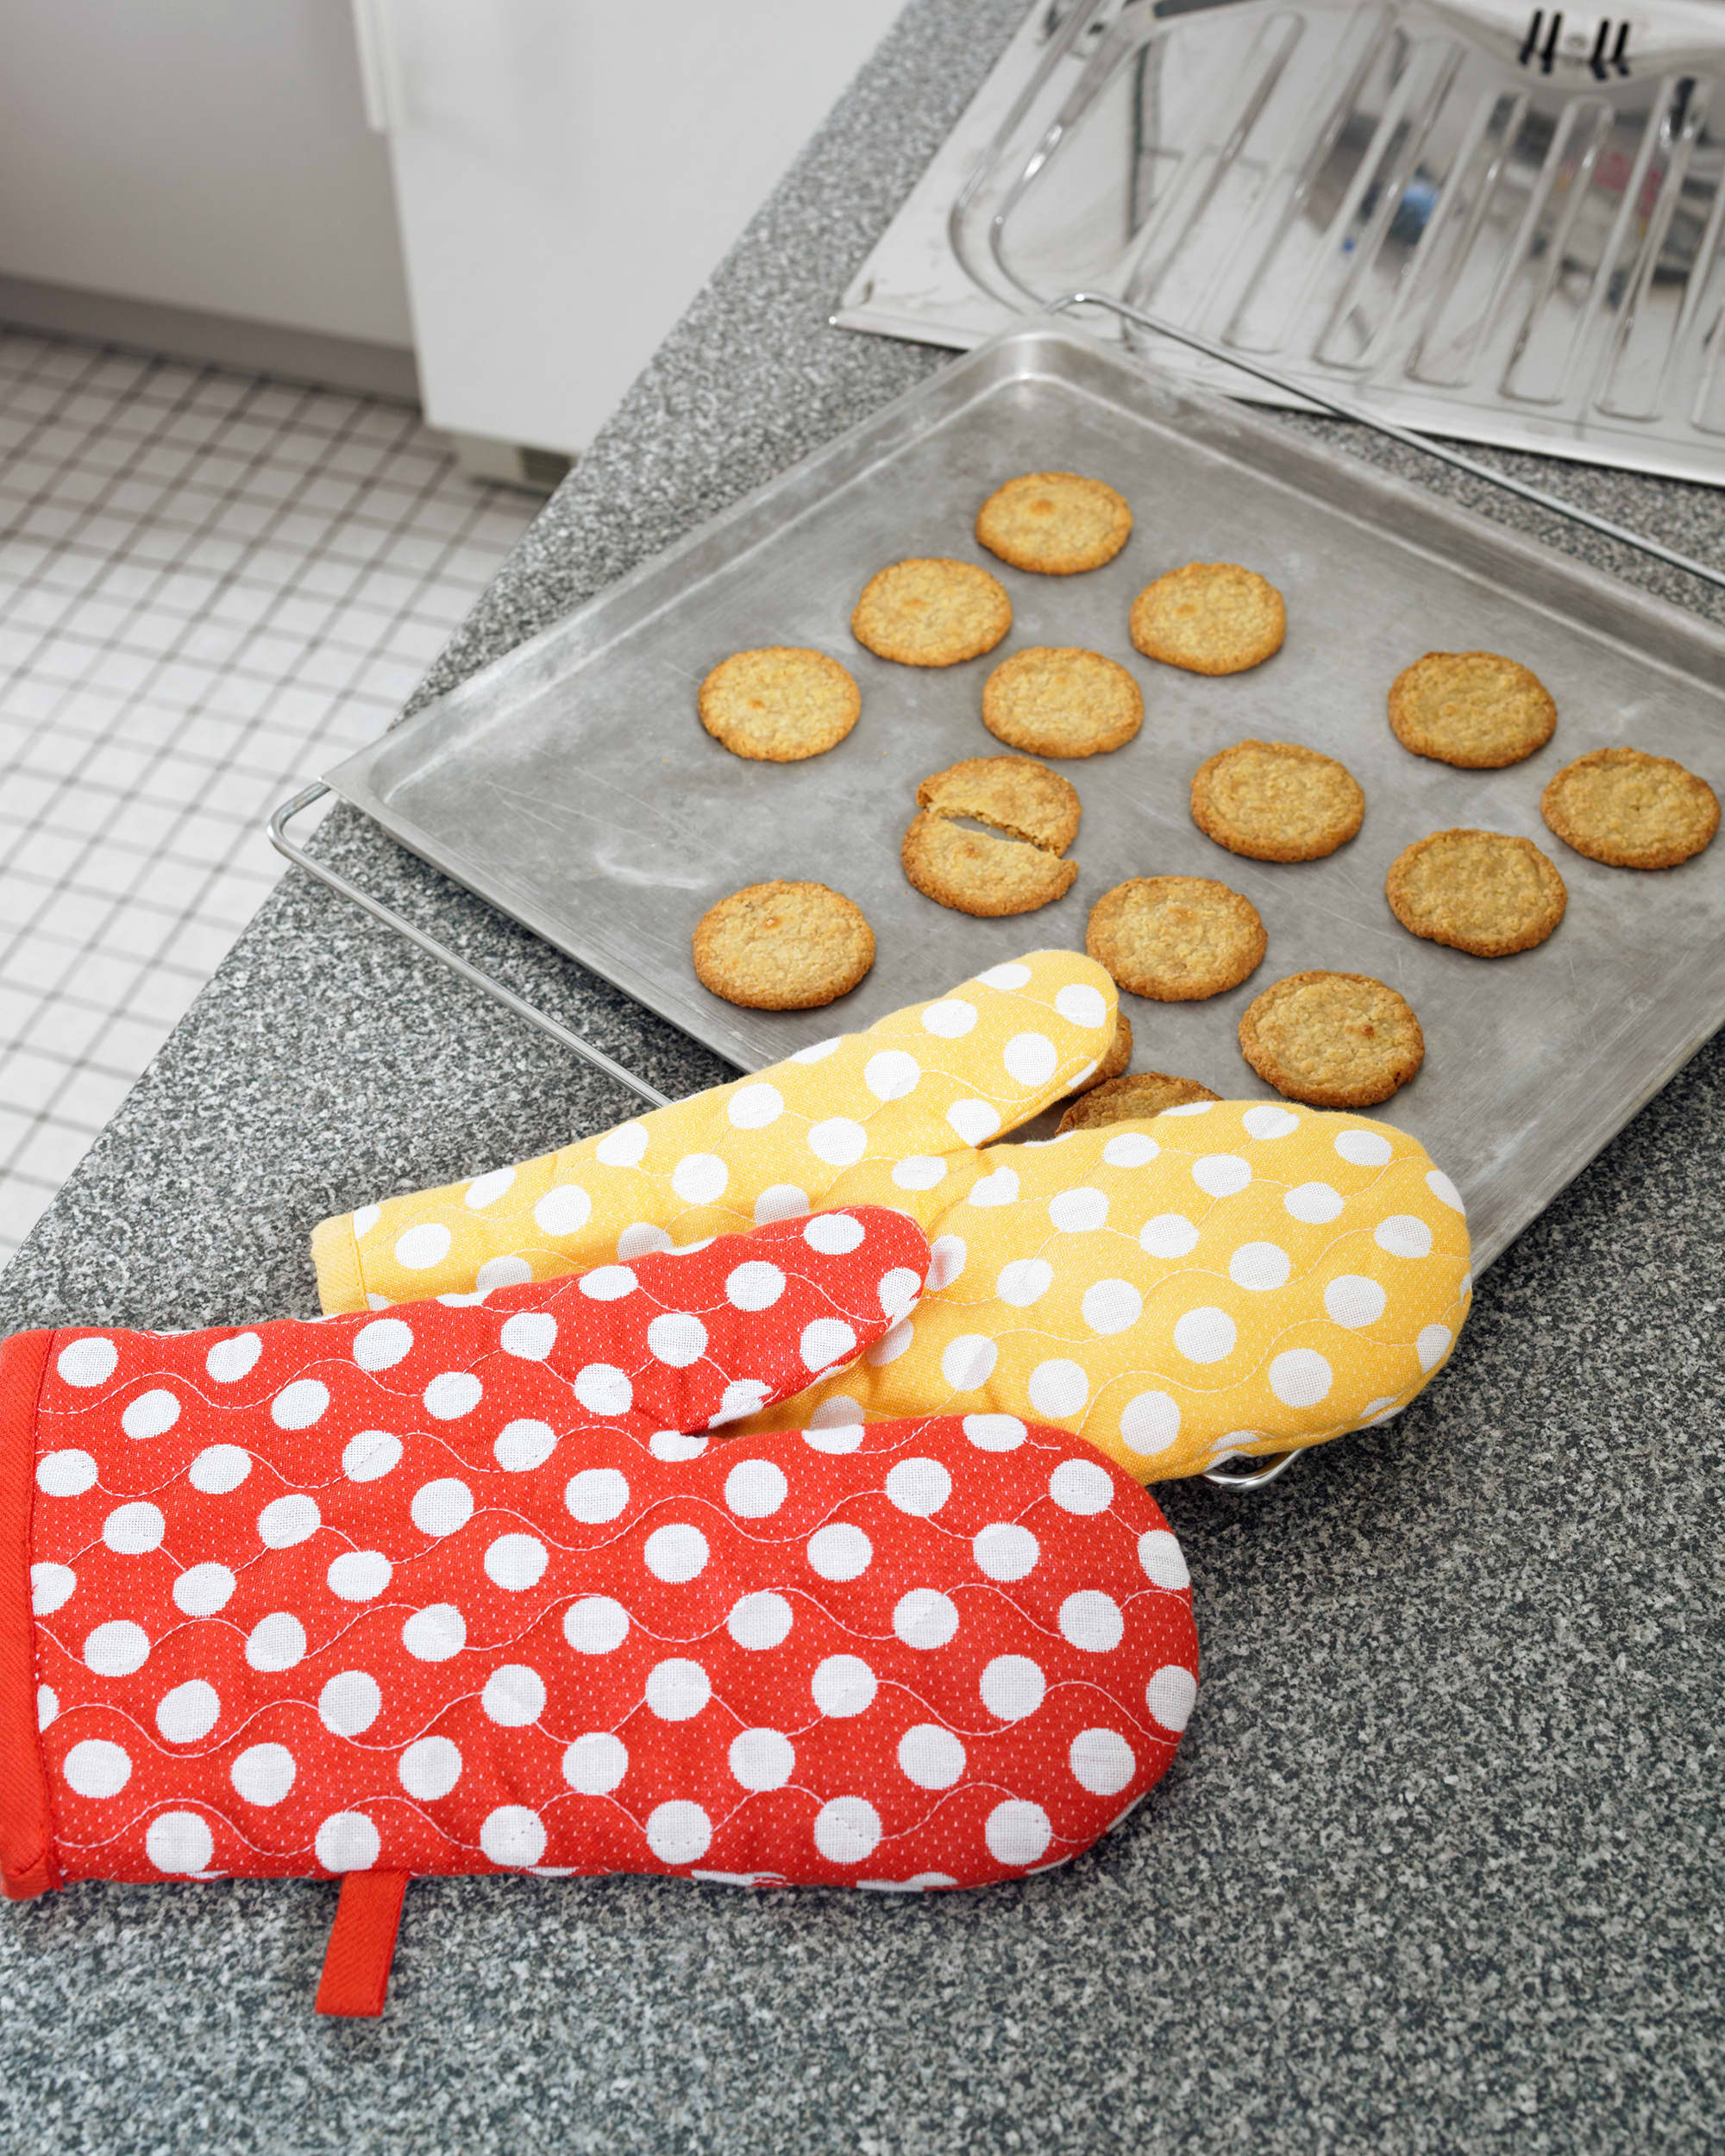 This Is the Smartest (and Cutest) Way to Store Your Oven Mitts and